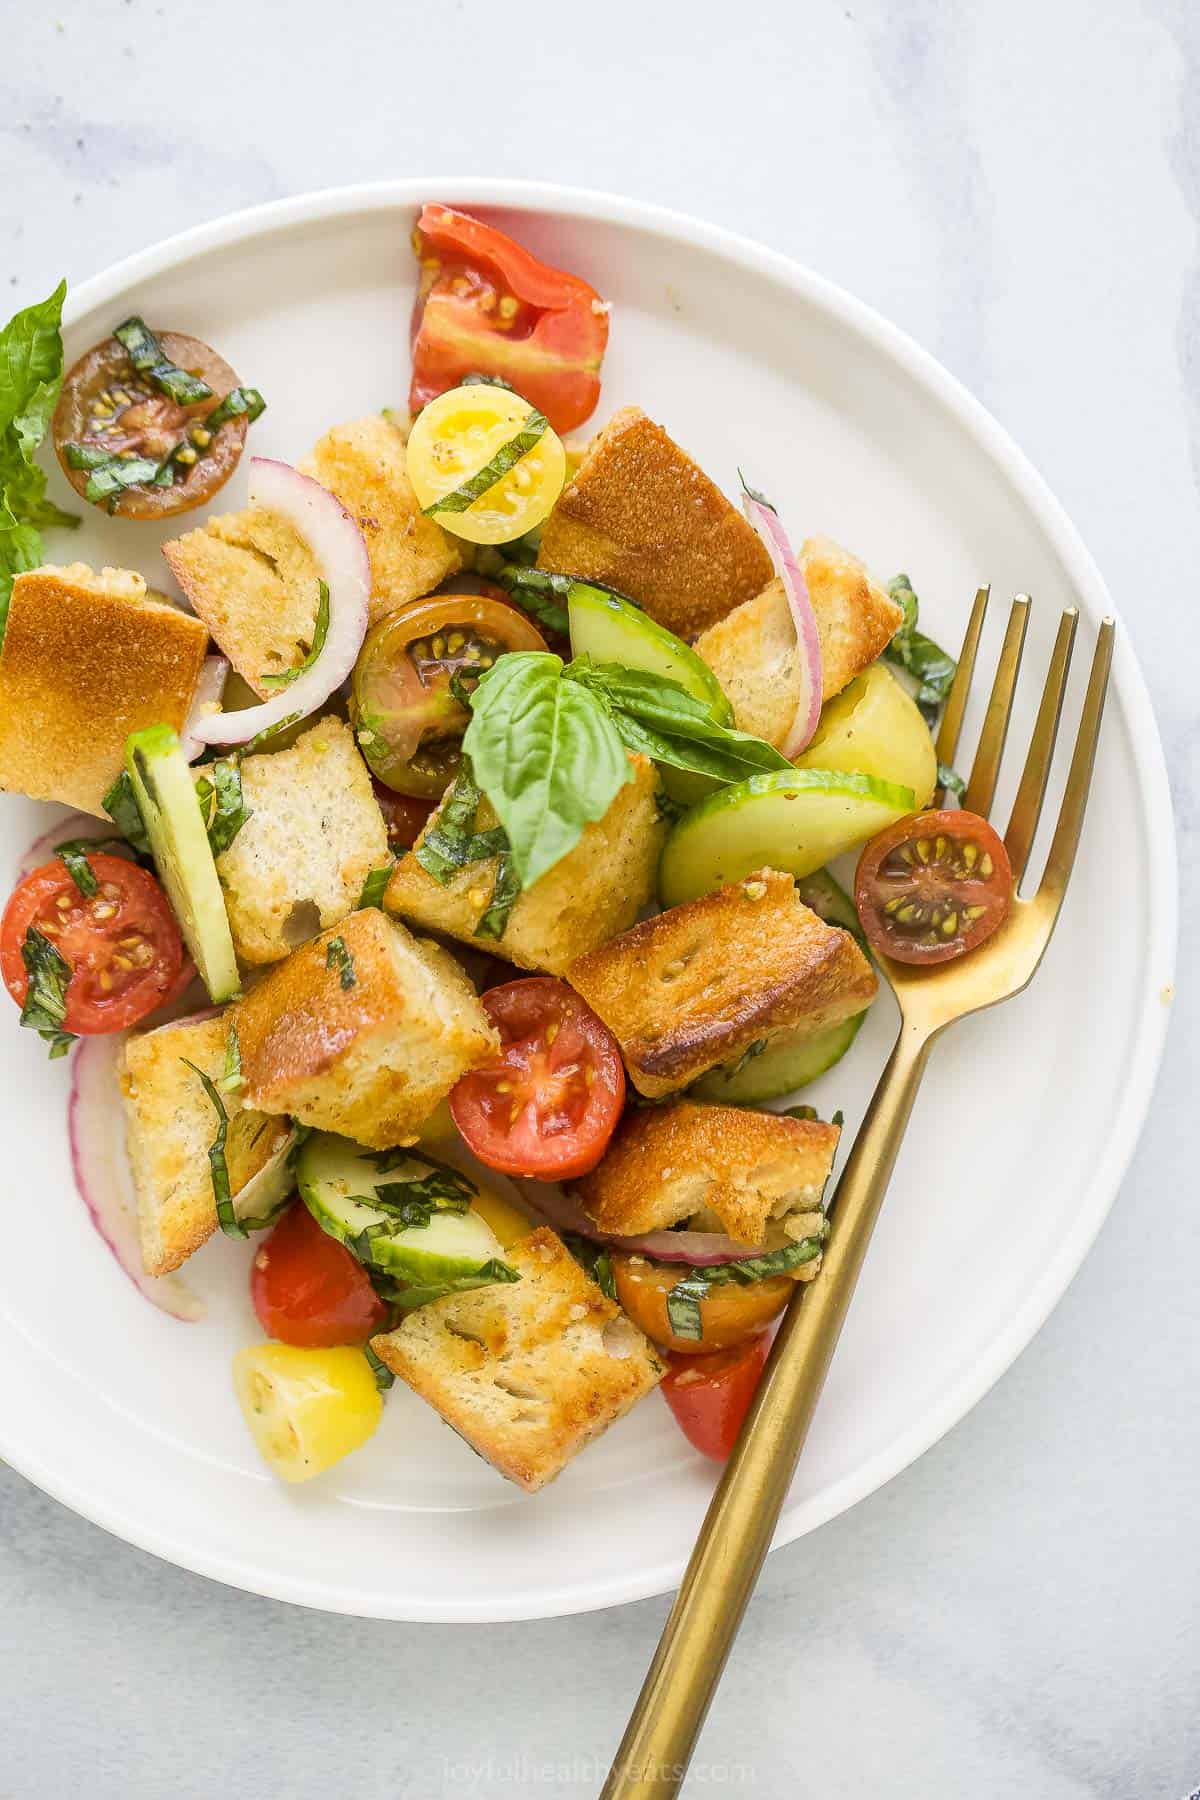 A plate of cucumber tomato onion salad with croutons and white balsamic vinaigrette dressing